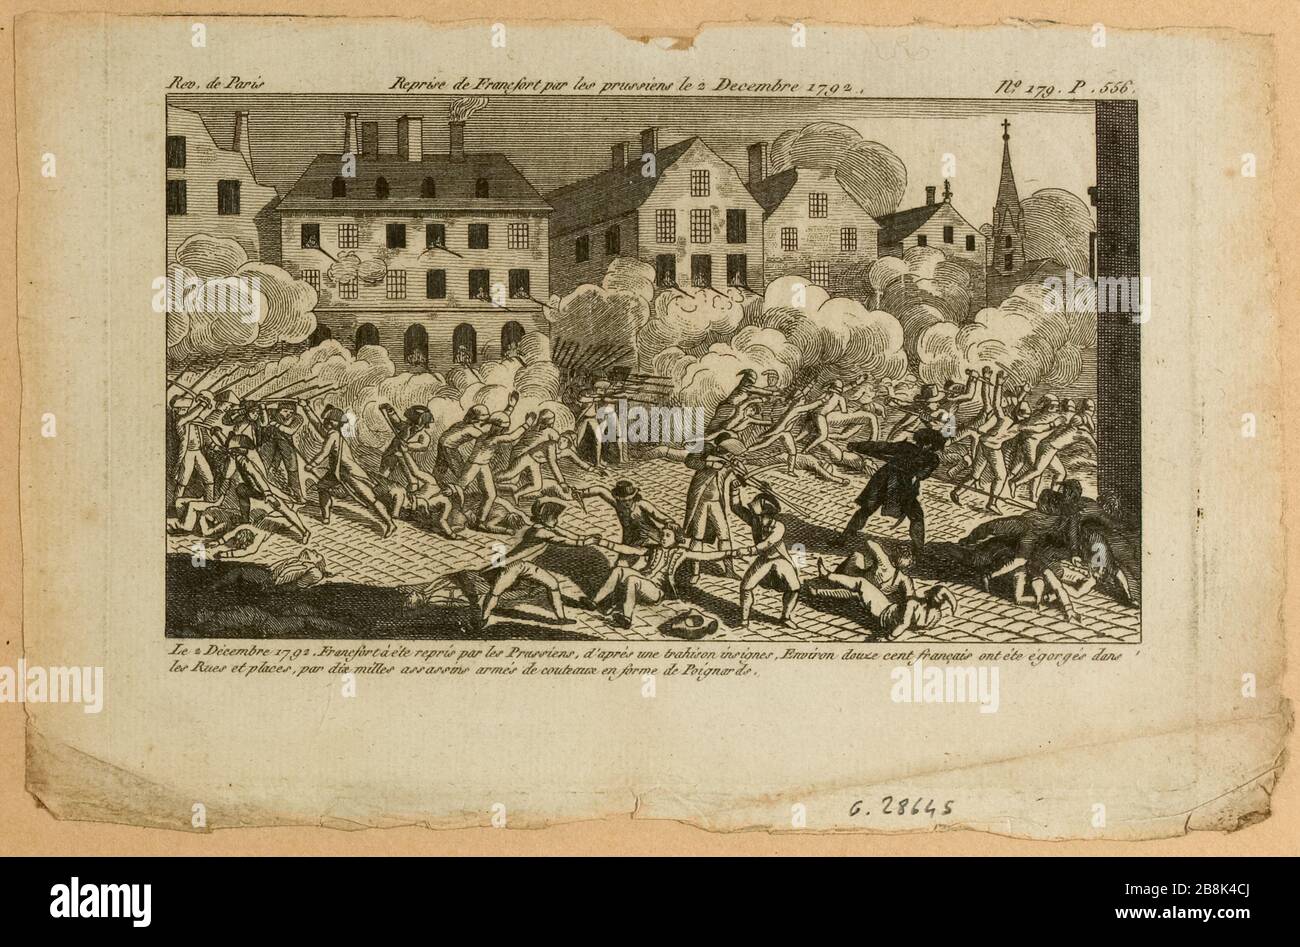 Resumption of the City of Frankfurt by the Prussians, Austrians and Hessians (Germany) and French massacre. November 28, 1792. Print Nº179, p.556 of the Journal of Paris Revolutions 8-15 December. (Dummy title) Stock Photo